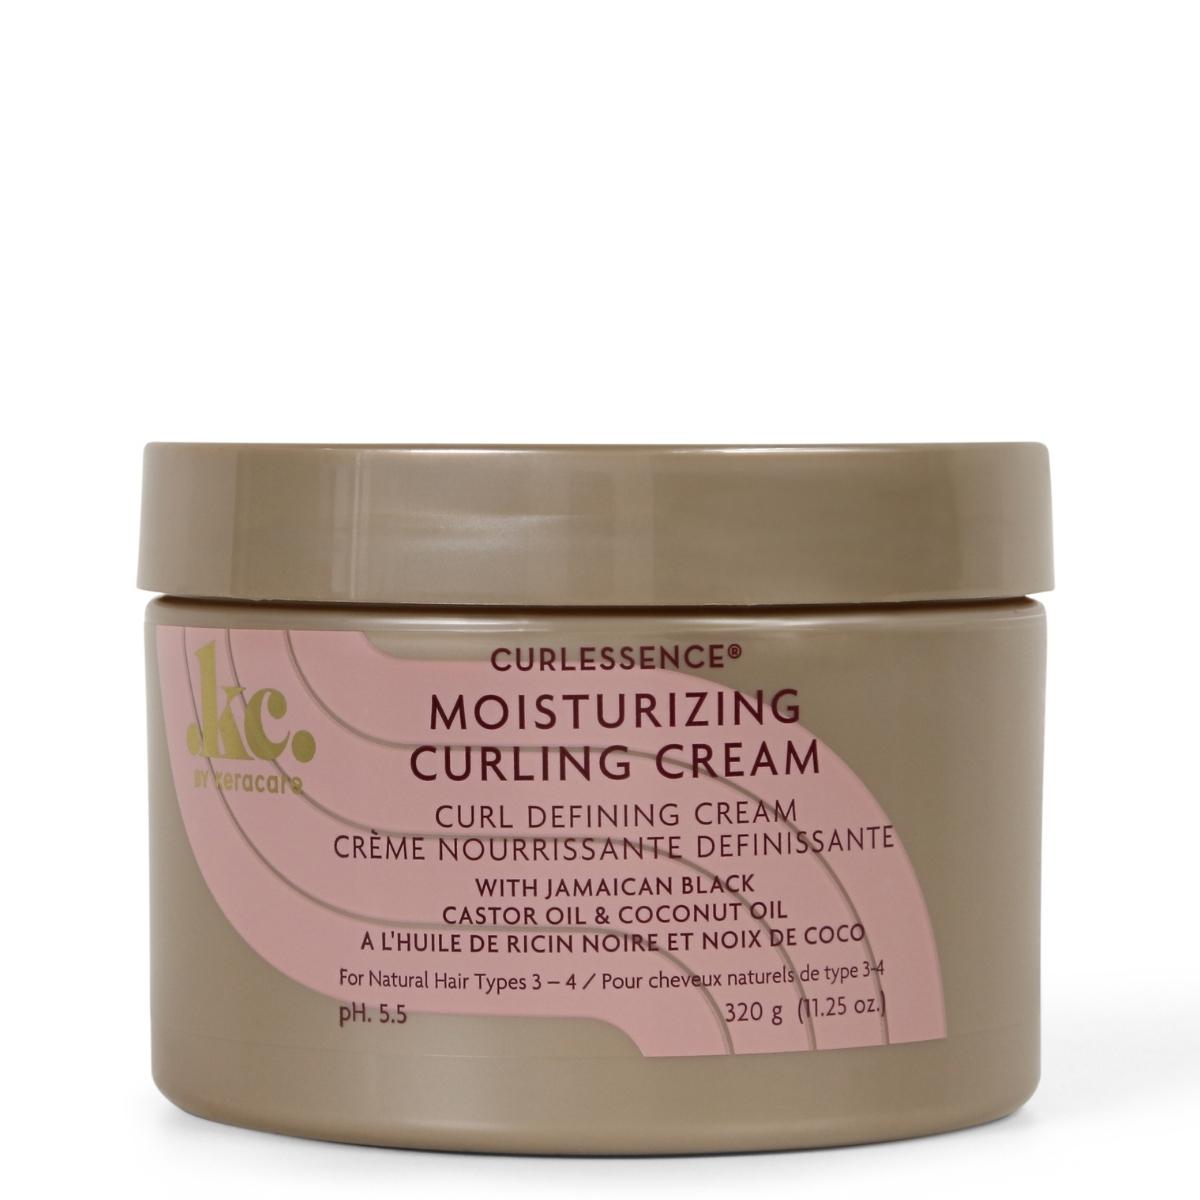 Curlessence by Keracare - Curling Cream - Styling Cream (320g)